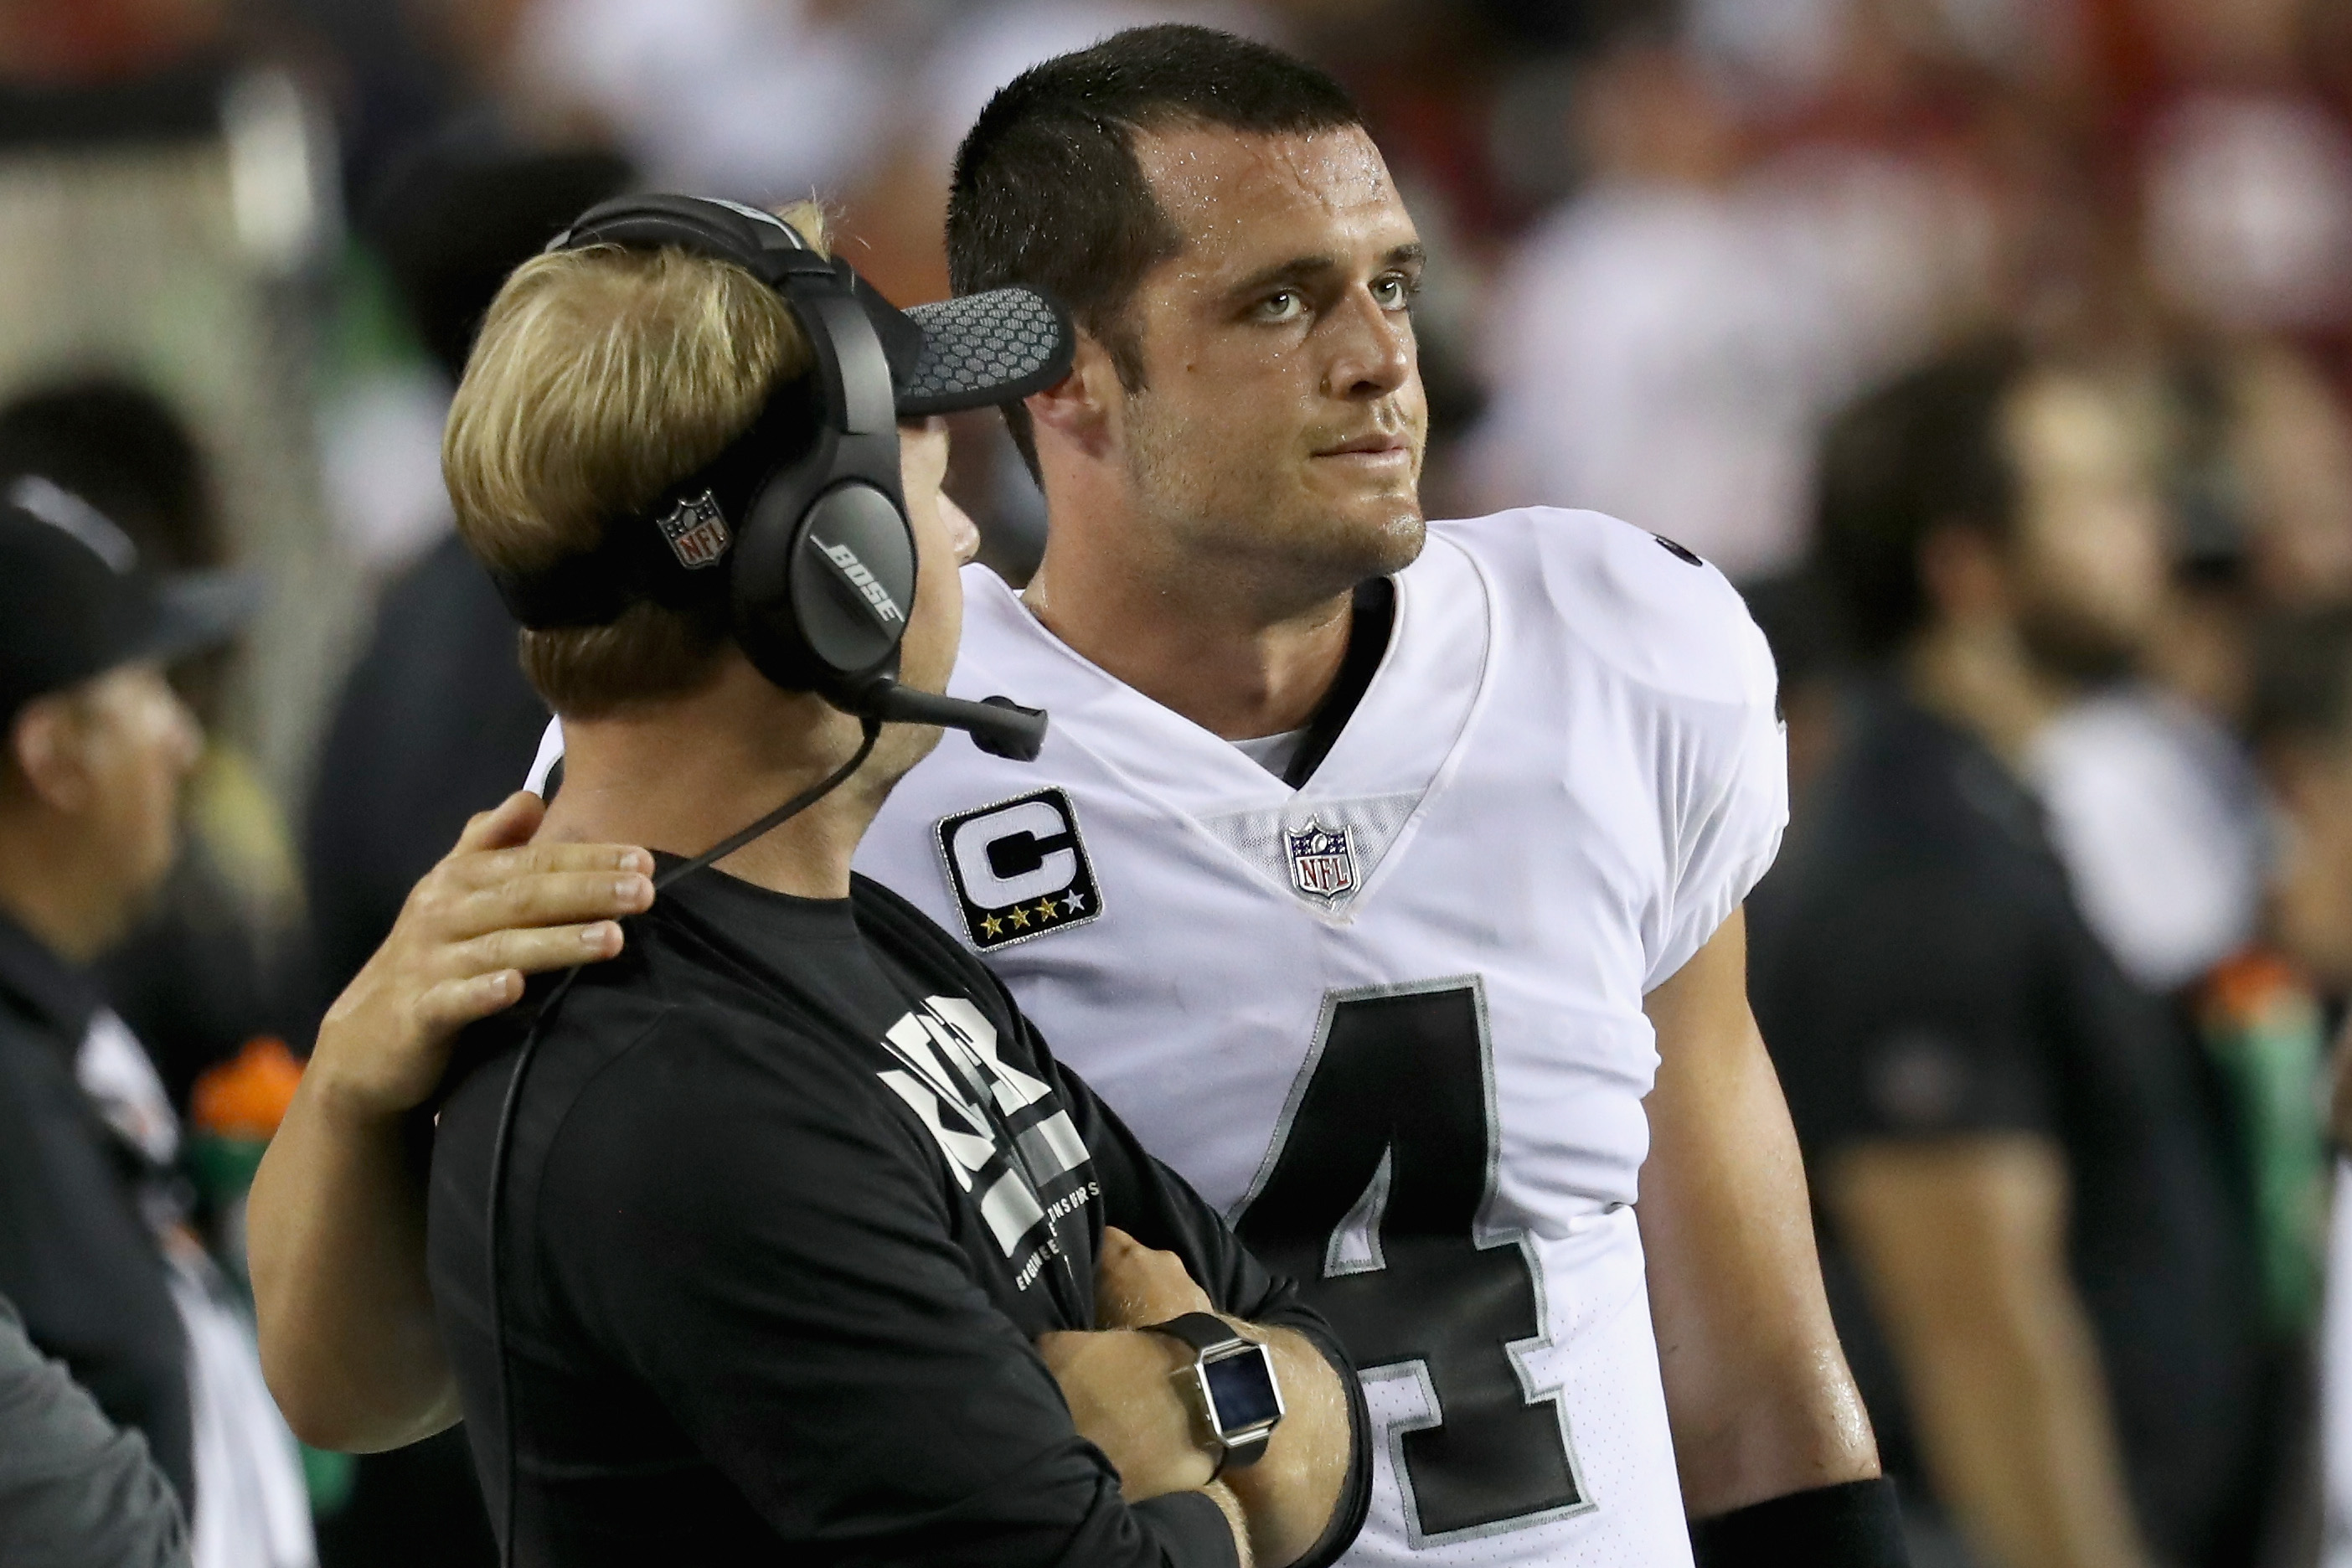 LANDOVER, MD - SEPTEMBER 24: Quarterback Derek Carr #4 of the Oakland Raiders talks with wide recievers coach Nick Holz during the closing moments of the Raiders 27-10 loss to the Washington Redskins at FedExField on September 24, 2017 in Landover, Maryland.